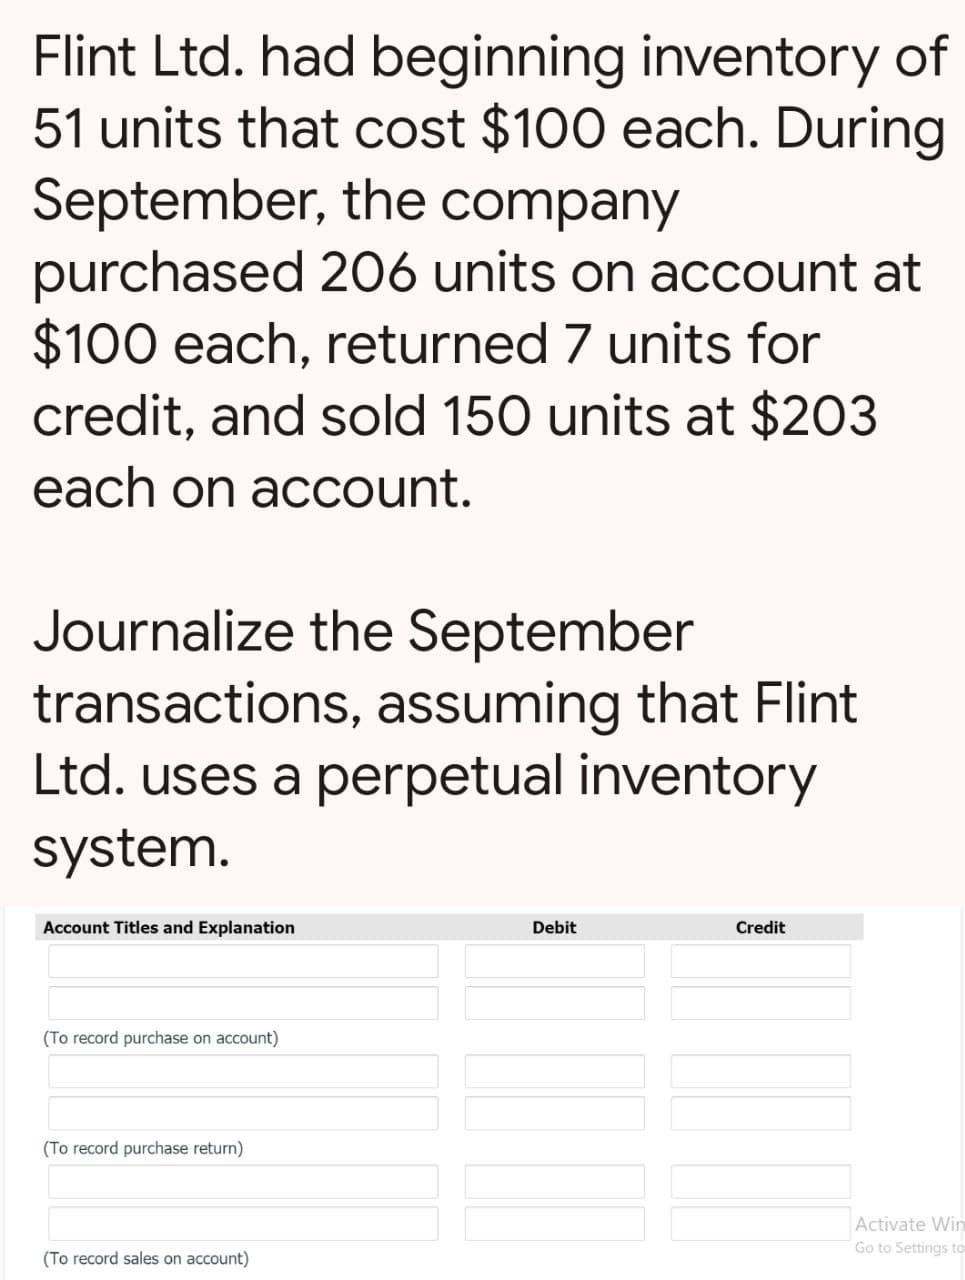 Flint Ltd. had beginning inventory of
51 units that cost $100 each. During
September, the company
purchased 206 units on account at
$100 each, returned 7 units for
credit, and sold 150 units at $203
each on account.
Journalize the September
transactions, assuming that Flint
Ltd. uses a perpetual inventory
system.
Account Titles and Explanation
(To record purchase on account)
(To record purchase return)
(To record sales on account)
Debit
Credit
Activate Win
Go to Settings to